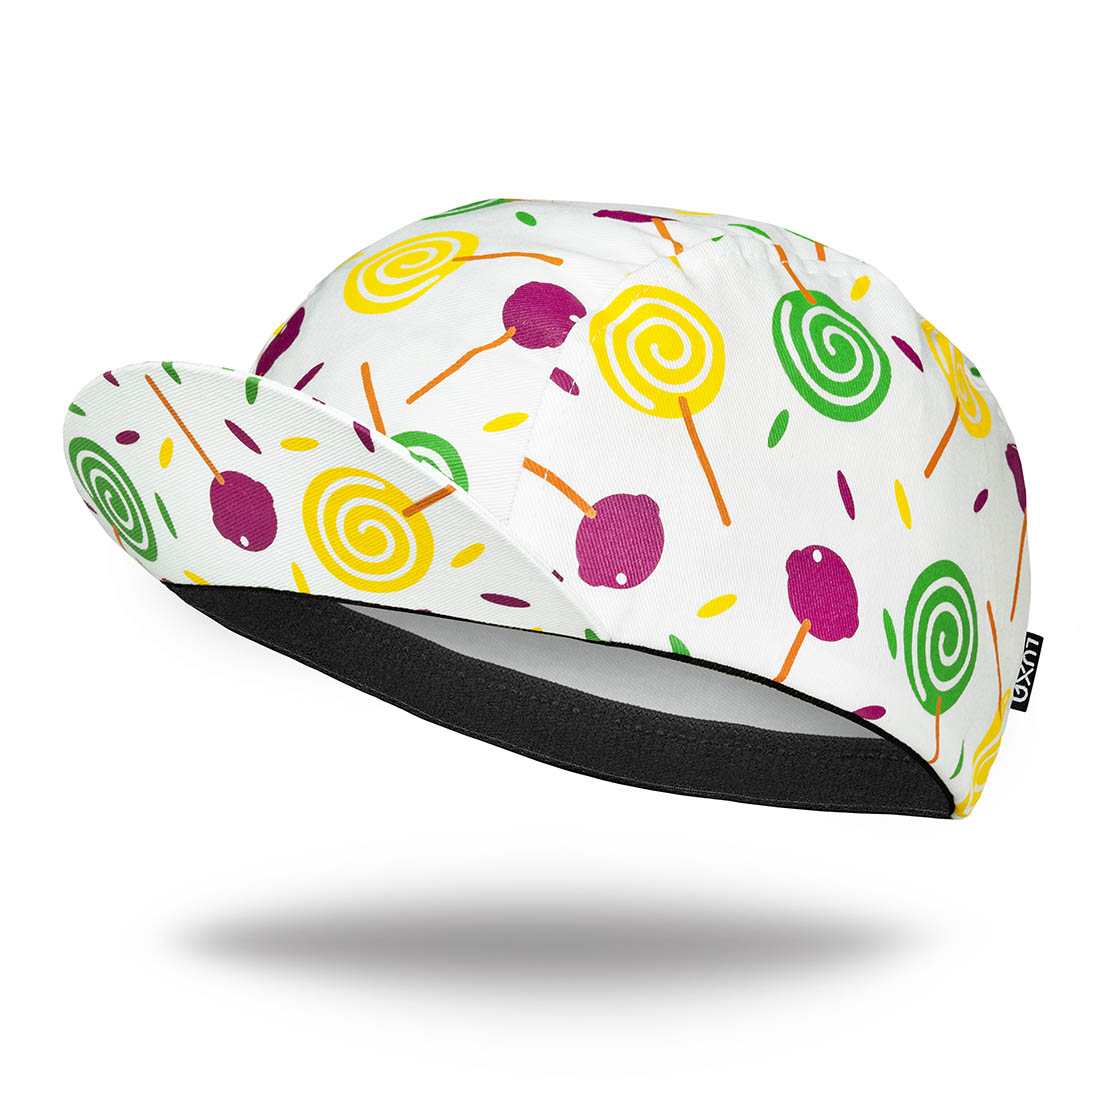 cotton cap to wear under helmet designed with black and white squares pattern